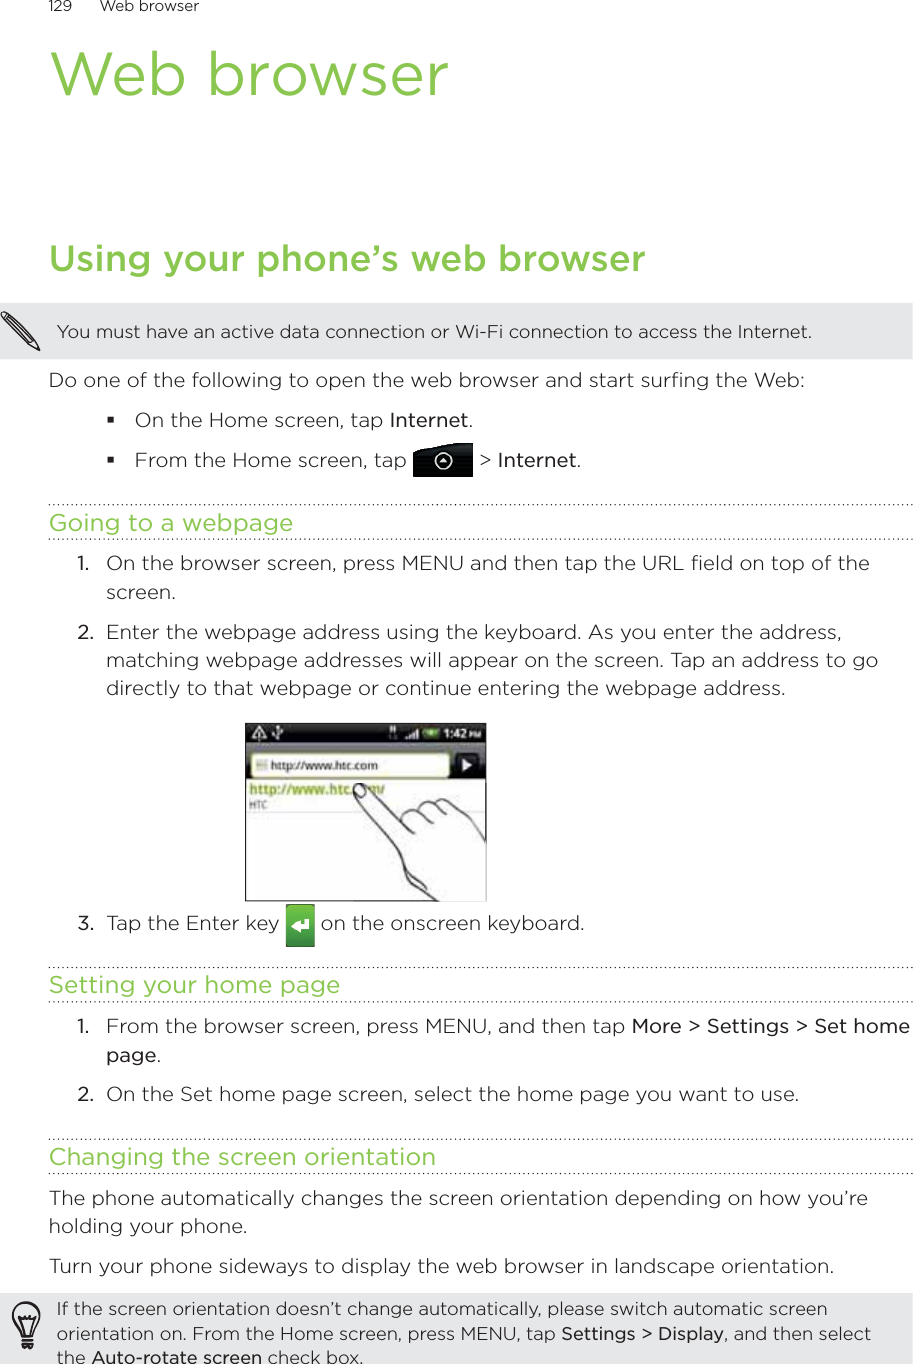 129      Web browser      Web browserUsing your phone’s web browserYou must have an active data connection or Wi-Fi connection to access the Internet.Do one of the following to open the web browser and start surfing the Web:On the Home screen, tap Internet.From the Home screen, tap  &gt; Internet.Going to a webpageOn the browser screen, press MENU and then tap the URL field on top of the screen.2.  Enter the webpage address using the keyboard. As you enter the address, matching webpage addresses will appear on the screen. Tap an address to go directly to that webpage or continue entering the webpage address.3.  Tap the Enter key   on the onscreen keyboard.Setting your home pageFrom the browser screen, press MENU, and then tap More &gt; Settings &gt; Set home page.On the Set home page screen, select the home page you want to use.Changing the screen orientationThe phone automatically changes the screen orientation depending on how you’re holding your phone. Turn your phone sideways to display the web browser in landscape orientation.If the screen orientation doesn’t change automatically, please switch automatic screen orientation on. From the Home screen, press MENU, tap Settings &gt; Display, and then select the Auto-rotate screen check box.1.1.2.